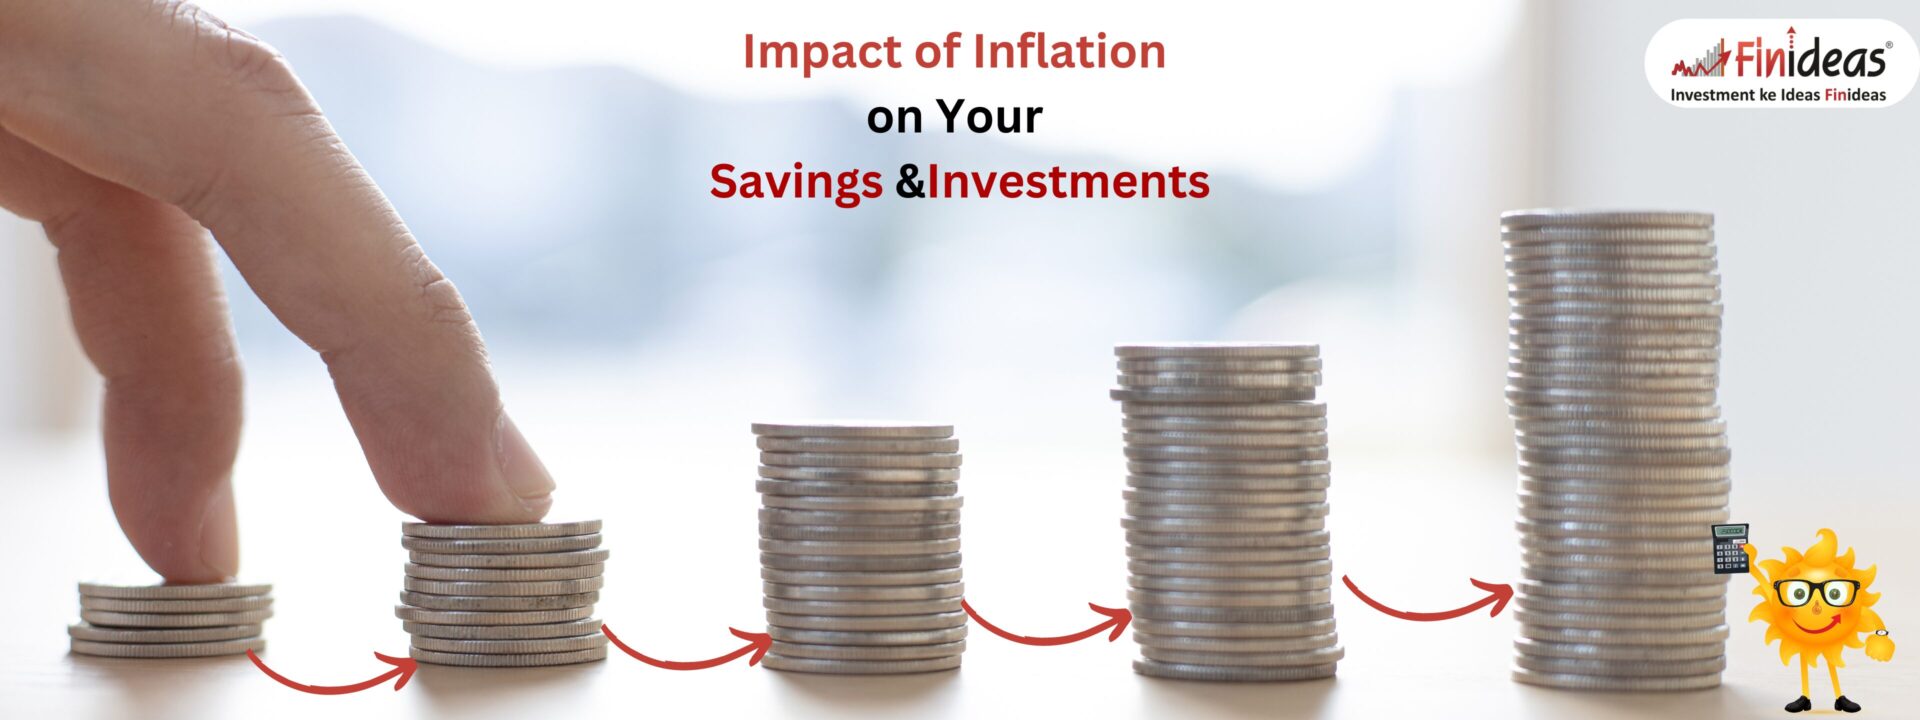 Impact of Inflation on Your Savings and Investments